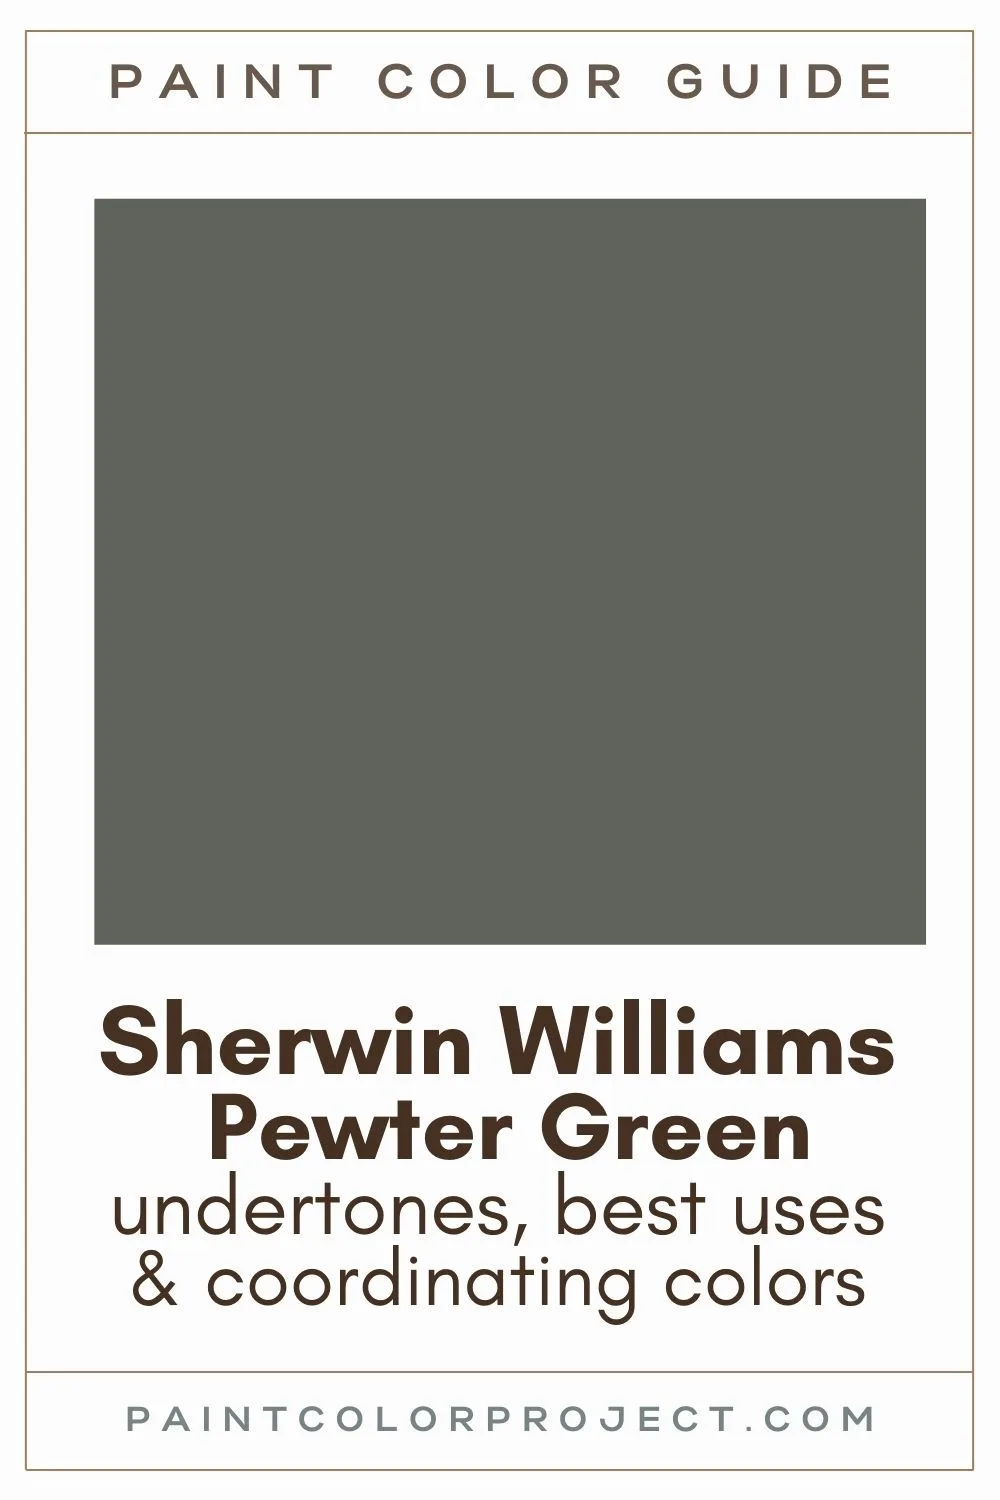 Sherwin Williams Pewter Green paint color guide